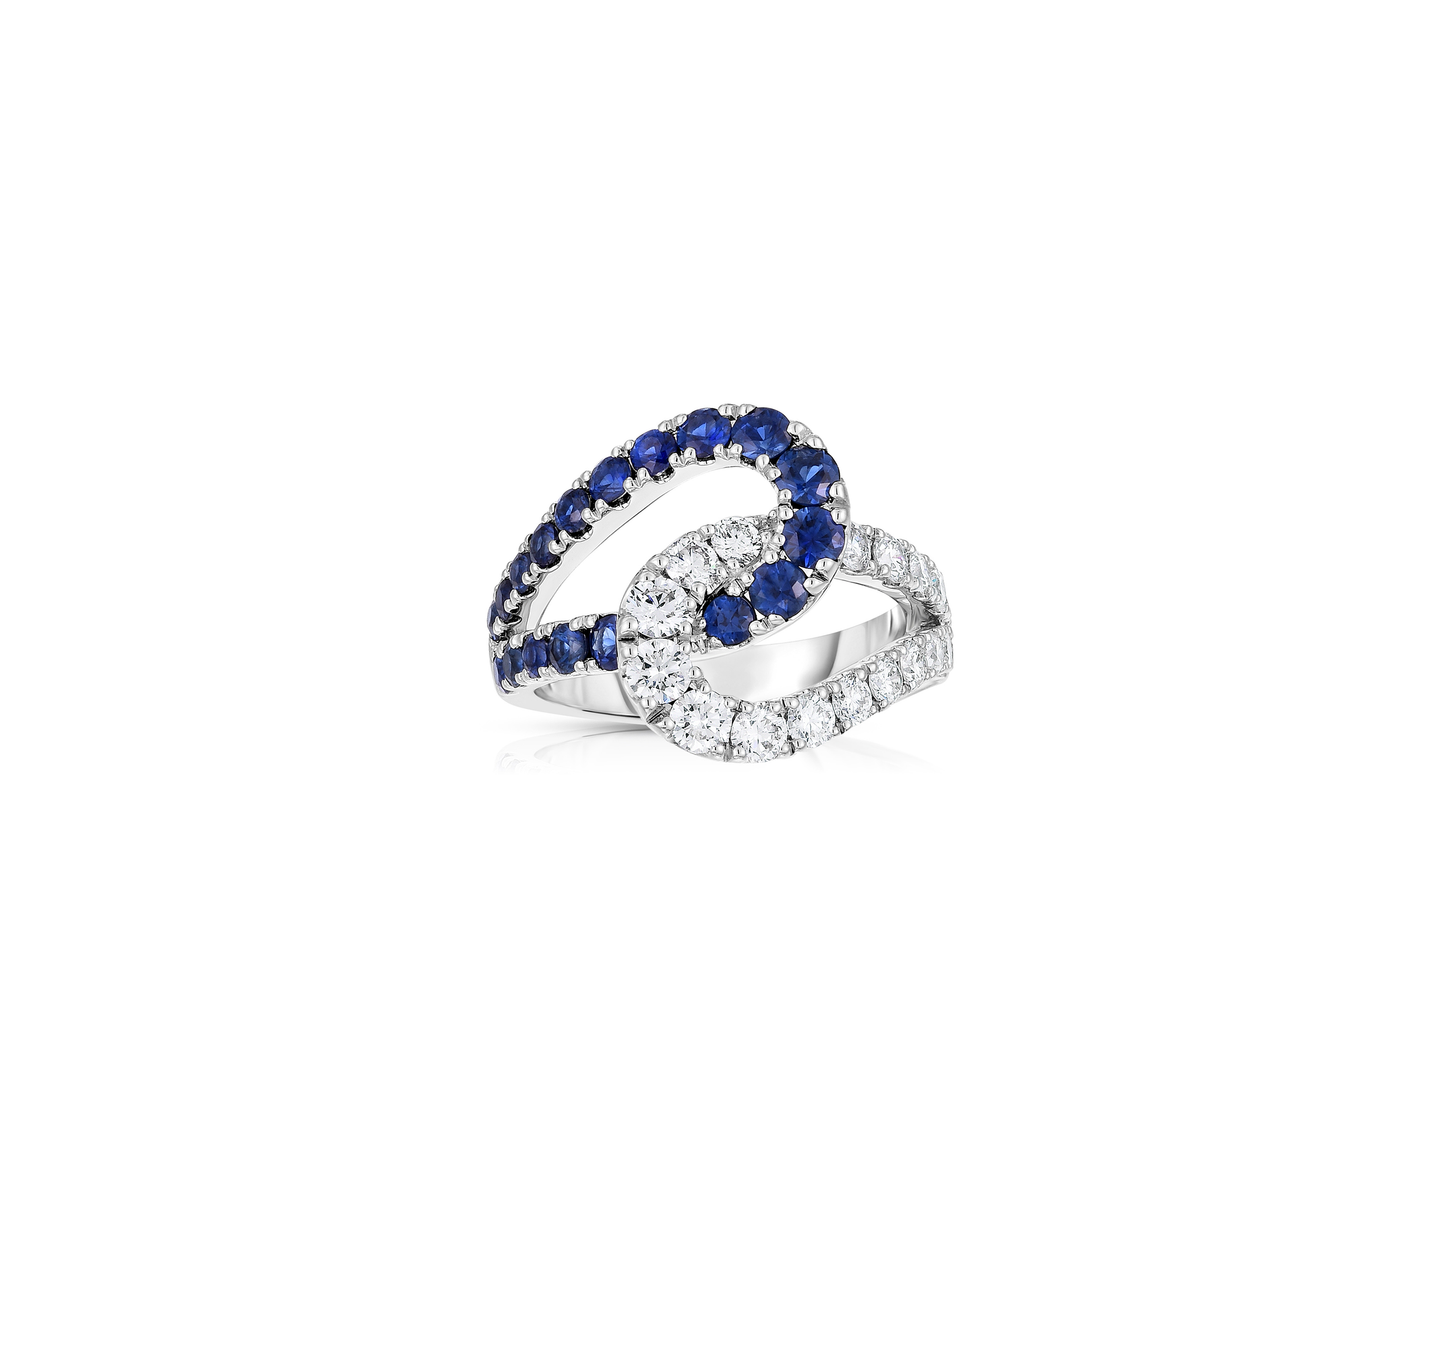 Sabel Collection 14K White Gold Infinity Knot Sapphire & Diamond Ring